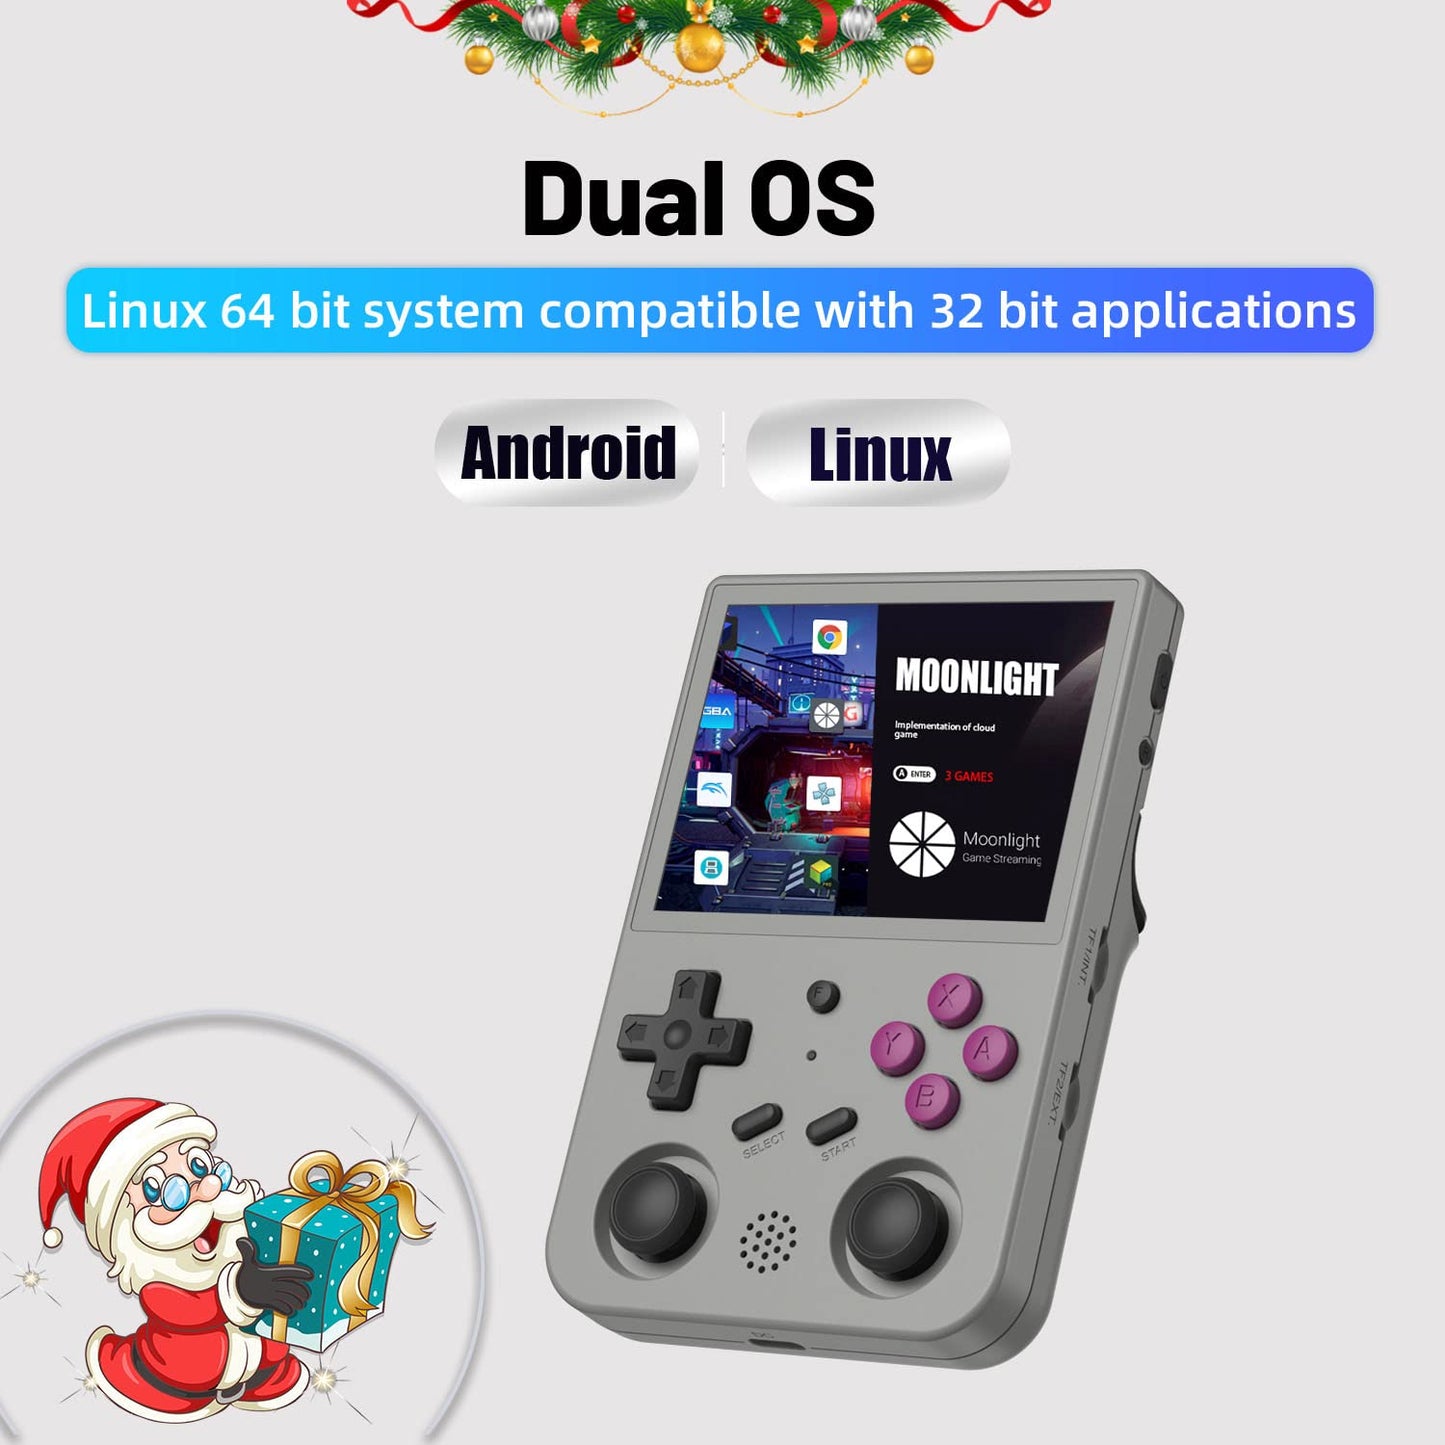 Aivuidbs Rg353v retro handheld game with dual os android 11 and linux,rg353v with 64g tf card pre-installed 4452 games supports 5g wifi 4.2 bluetooth online fighting,streaming and hdmi